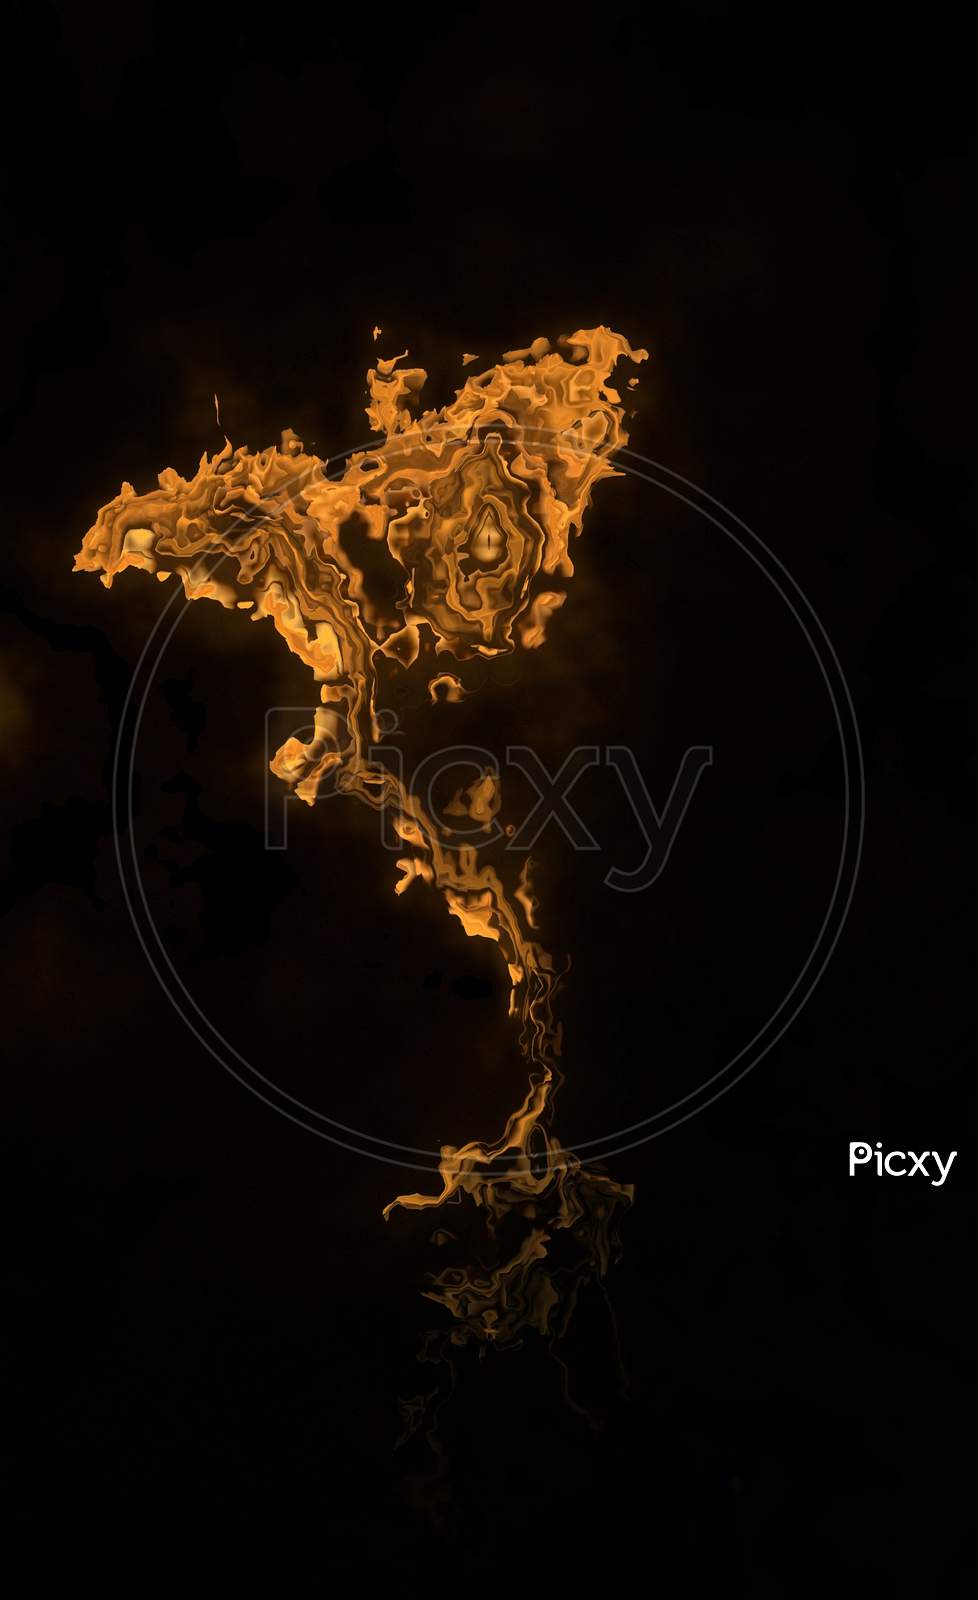 Fire with black background.